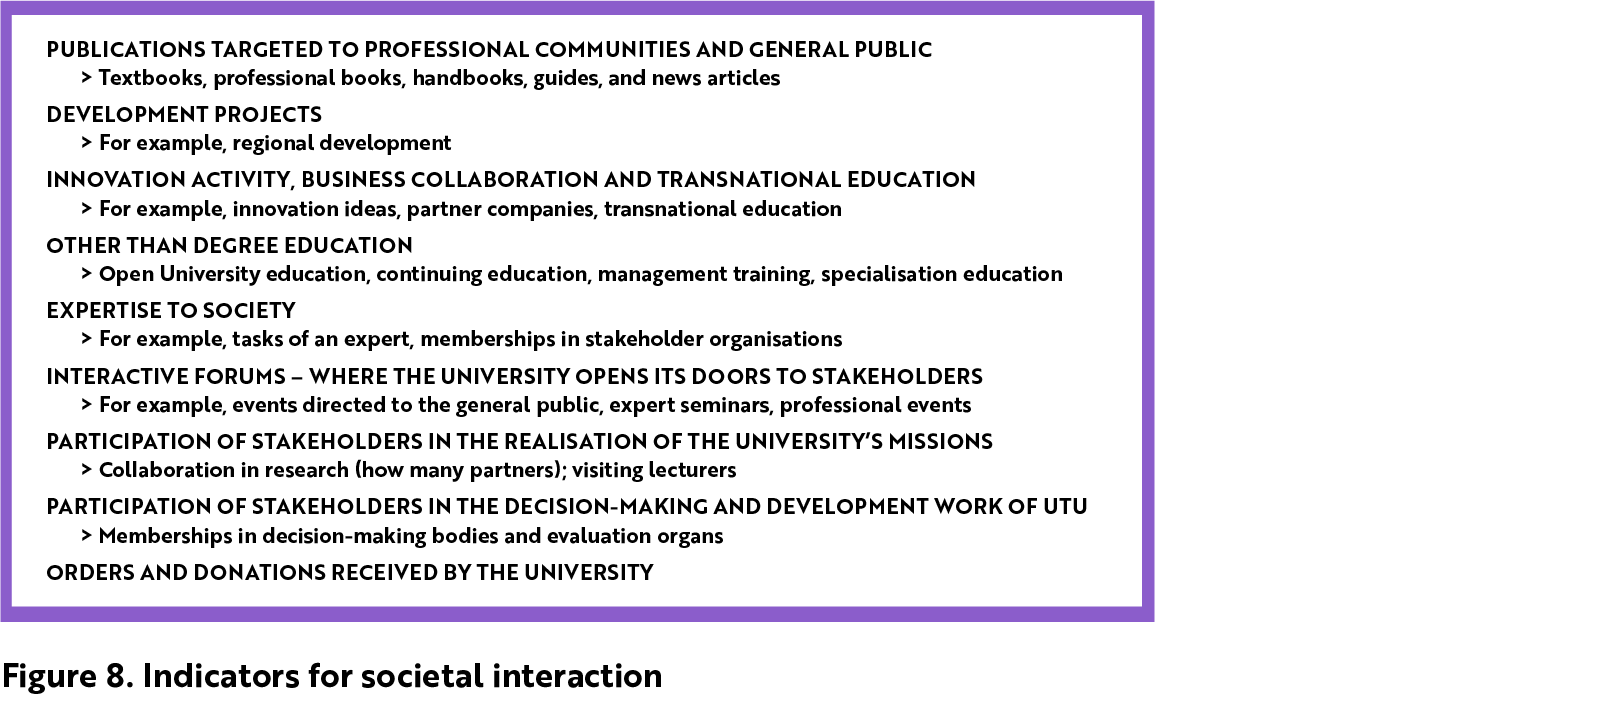 Indicators for societal interaction include publications targeted to professional communities and general public. For example, textbooks, professional books, handbooks, guides, and news articles. Development projects. For example, regional development. Innovation activity, business collaboration and transnational education. For example, innovation ideas, partner companies and transnational education. Education other than degree education, which includes Open University education, continuing education, management training and specialisation education. Expertise to society. For example, tasks of an expert and memberships in stakeholder organisations. Interactive forums, where the university opens its doors to stakeholders. For example, events directed to the general public, expert seminars and professional events. Participation of stakeholders in the realisation of the university’s missions. Including collaboration in research and visiting lecturers. Participation of stakeholders in the decision-making and development work of UTU. Including memberships in decision-making bodies and evaluation organs. Orders and donations received by the university. 